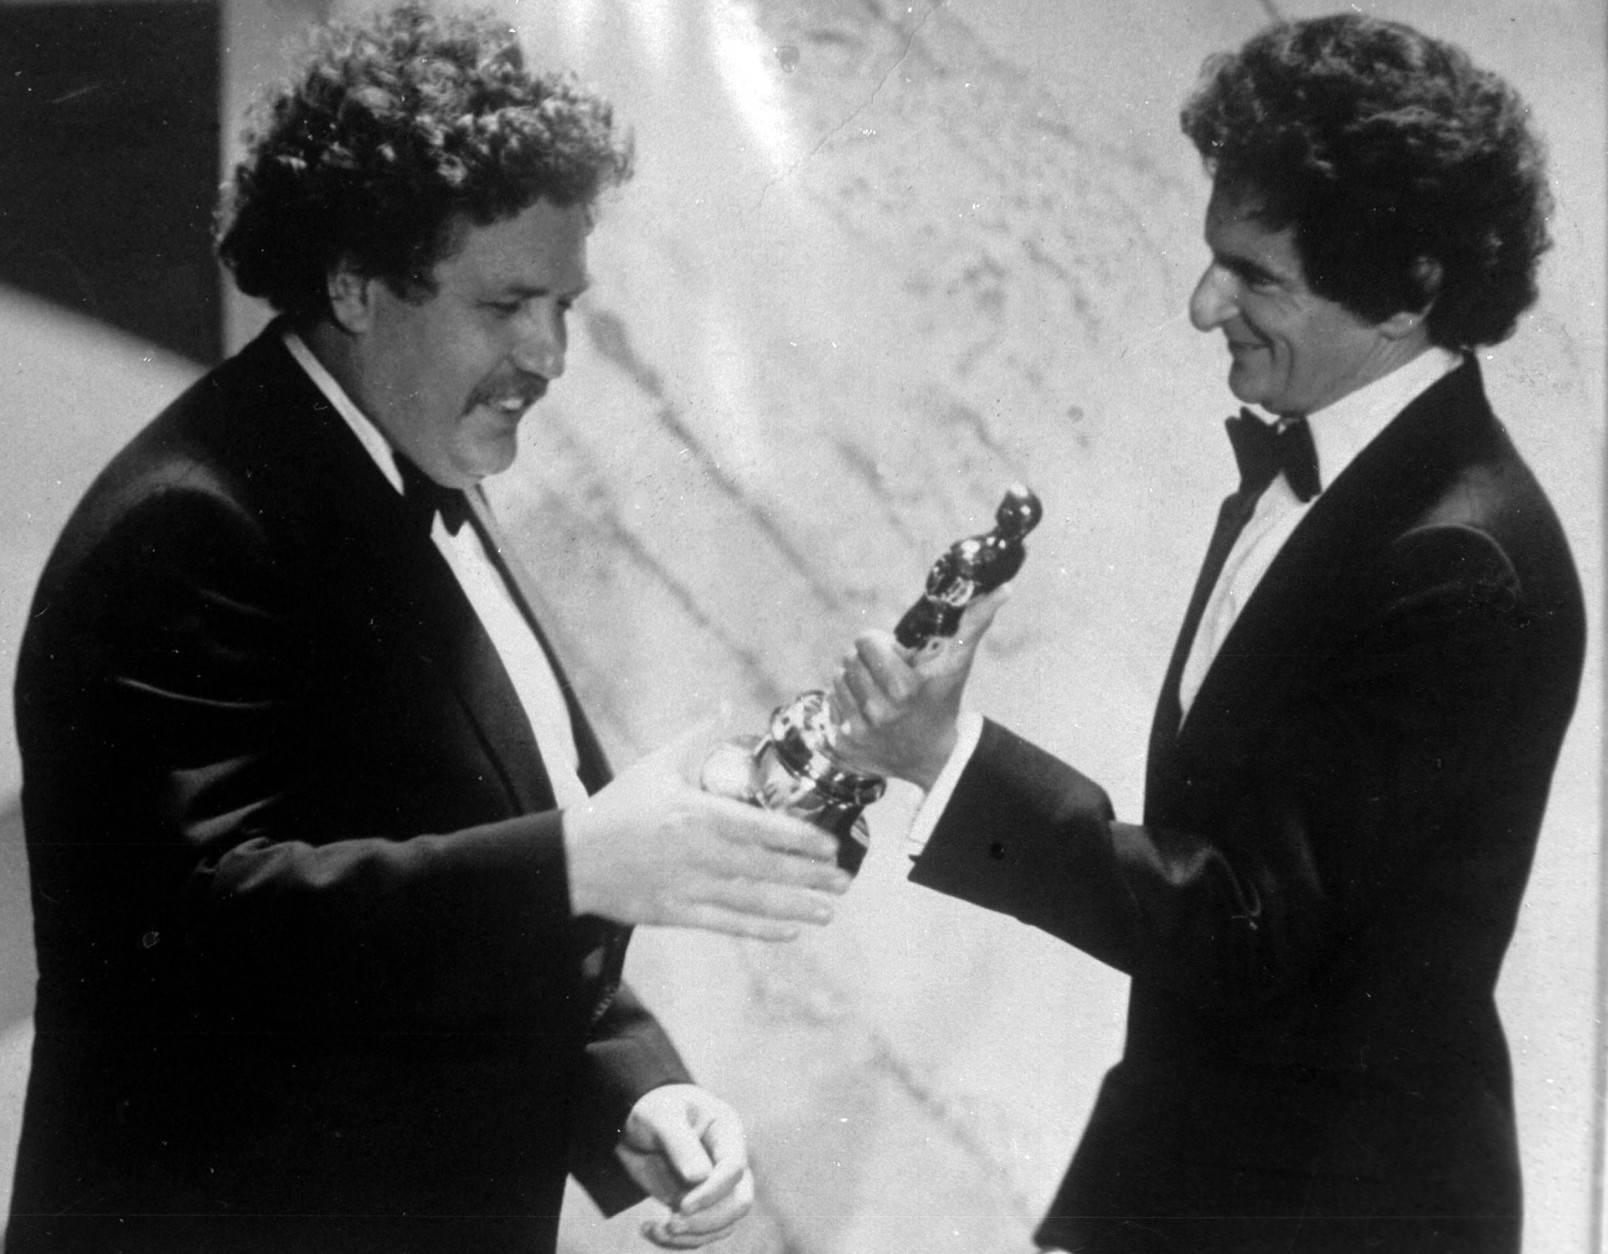 FILE - In this March 29, 1982 file photo, British actor and writer Colin Welland, left, accepts an Oscar for the best screenplay from Jerzy Kosinski, during the 54th annual Academy Awards presentation, Los Angeles. Actor and writer Colin Welland, who famously told Hollywood "the British are coming" when he won an Academy Award for "Chariots of Fire," has died aged 81. His family said in a statement Tuesday, Nov. 3, 2015 that Welland, who had suffered from Alzheimers disease, died peacefully in his sleep late Monday.  (AP Photo, File)